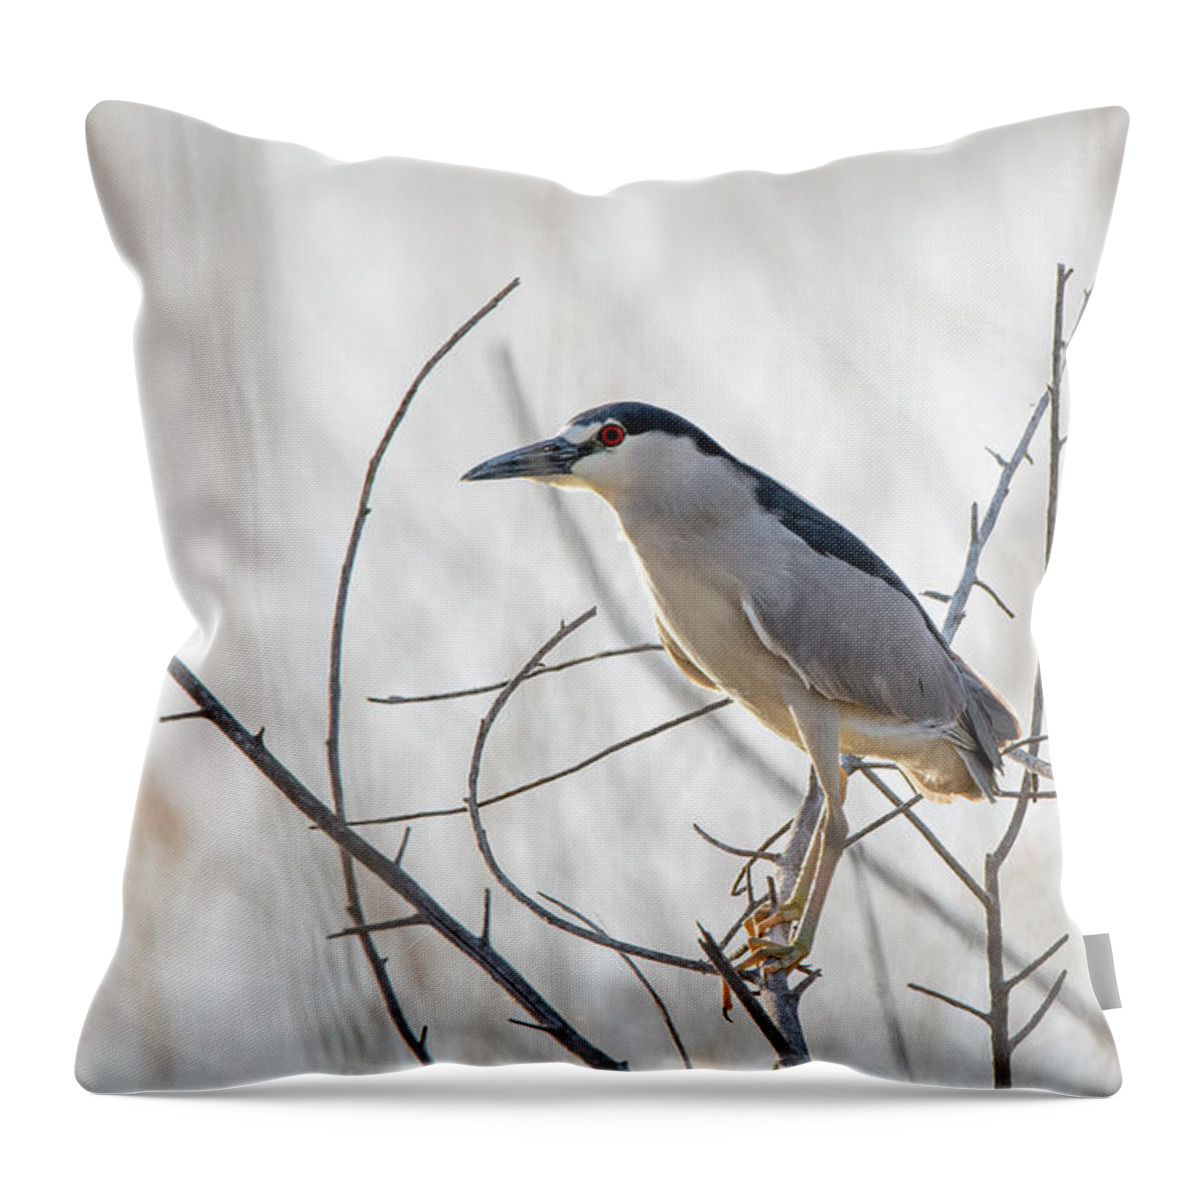 Lahontan Throw Pillow featuring the photograph Black Crowned Night Heron #1 by Rick Mosher